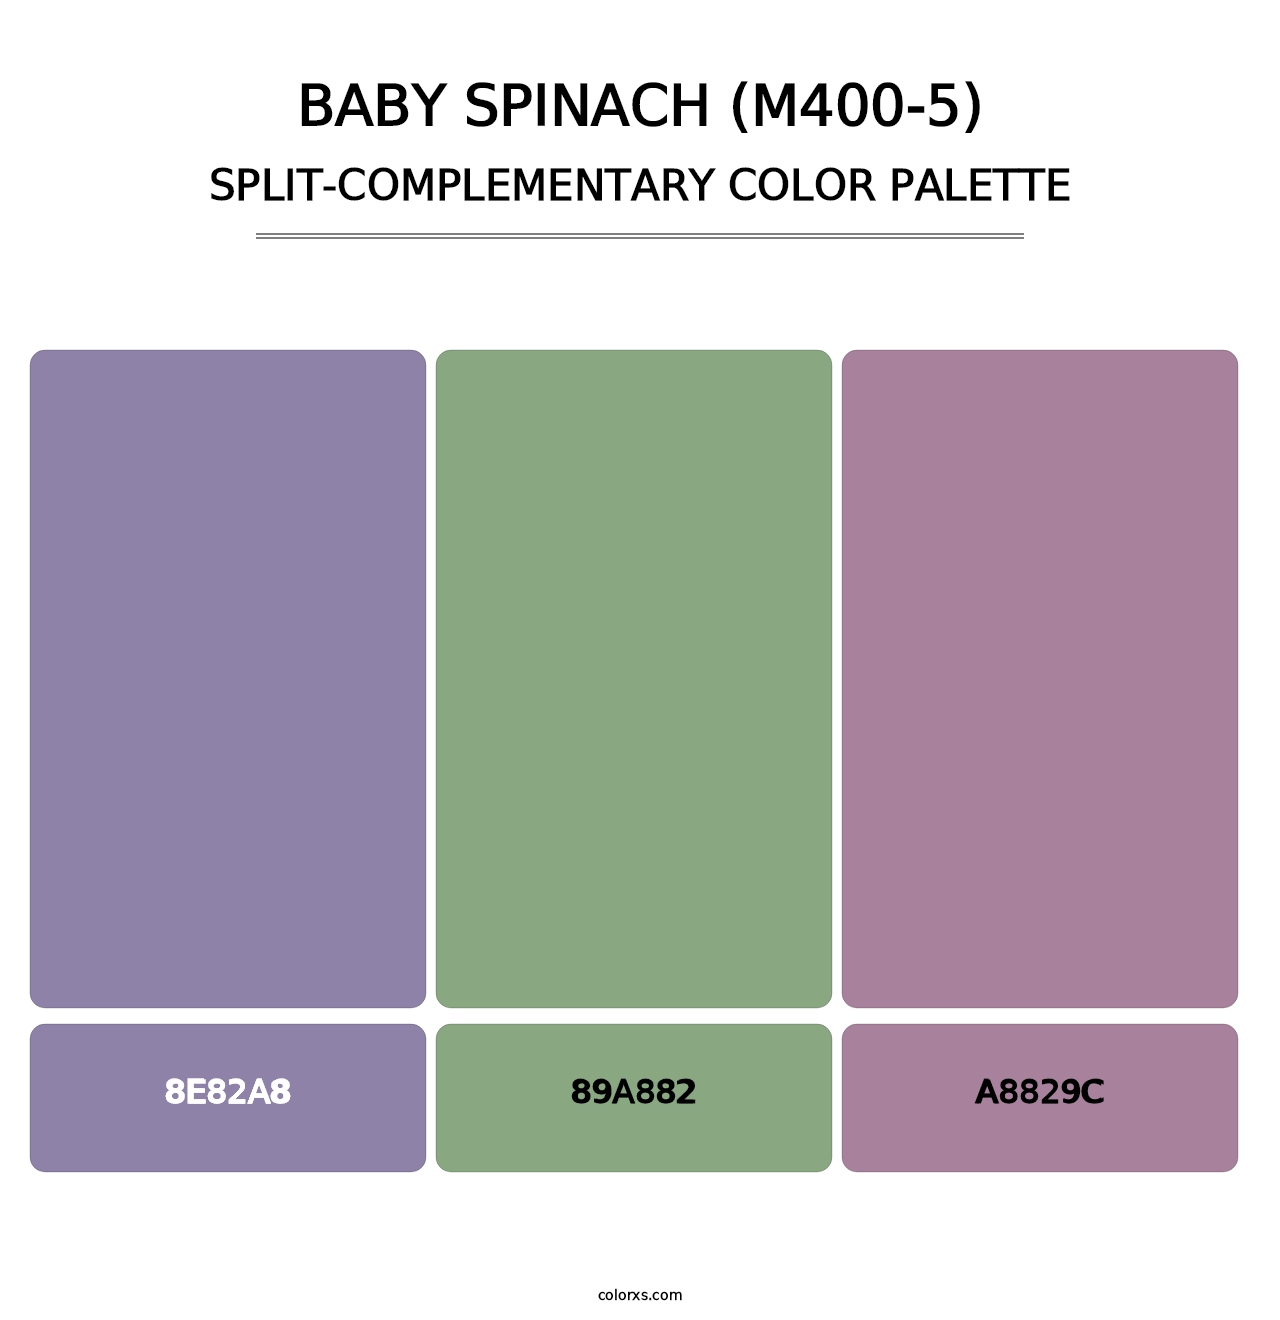 Baby Spinach (M400-5) - Split-Complementary Color Palette